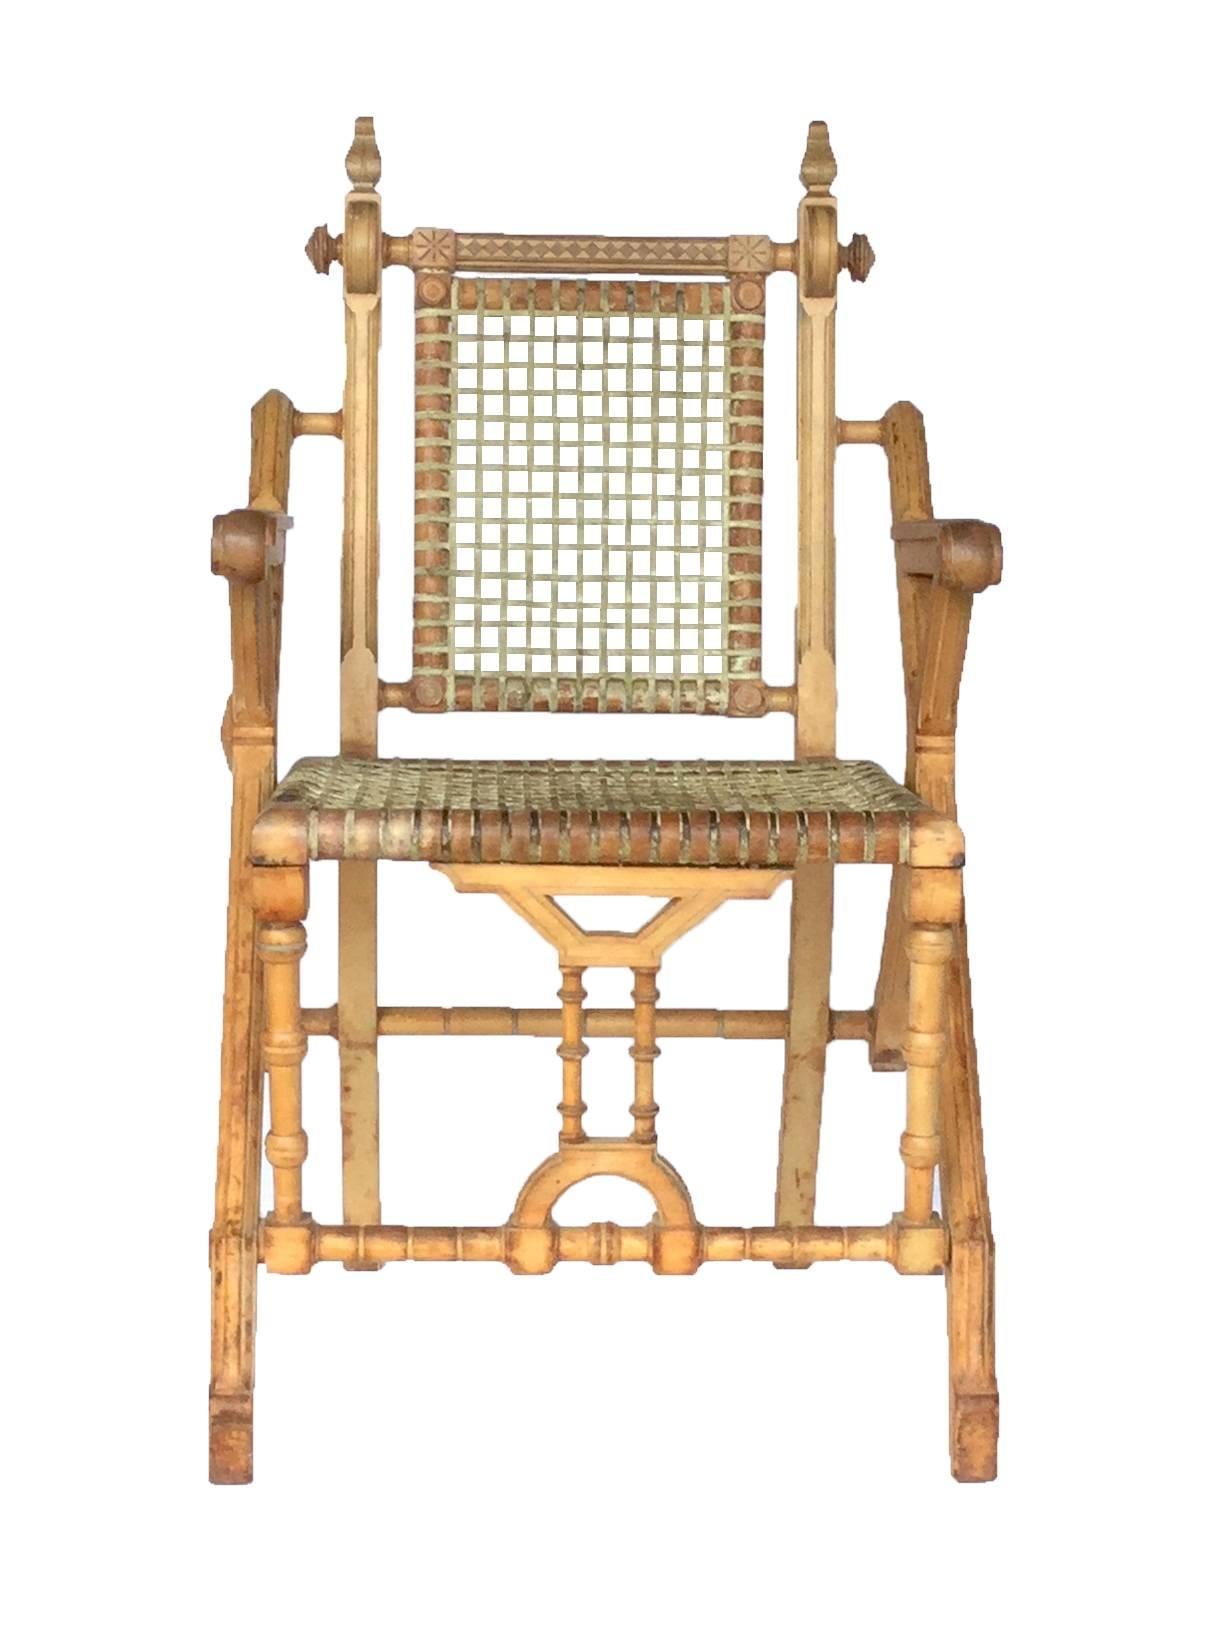 George Hunzinger (1835-98), Victorian-era inventor (he held 21 patents) created this unusual Aesthetic Movement side chair, very forward looking, for its transparency and structural rigor, offering an early glimmer of modernism’s emphasis on